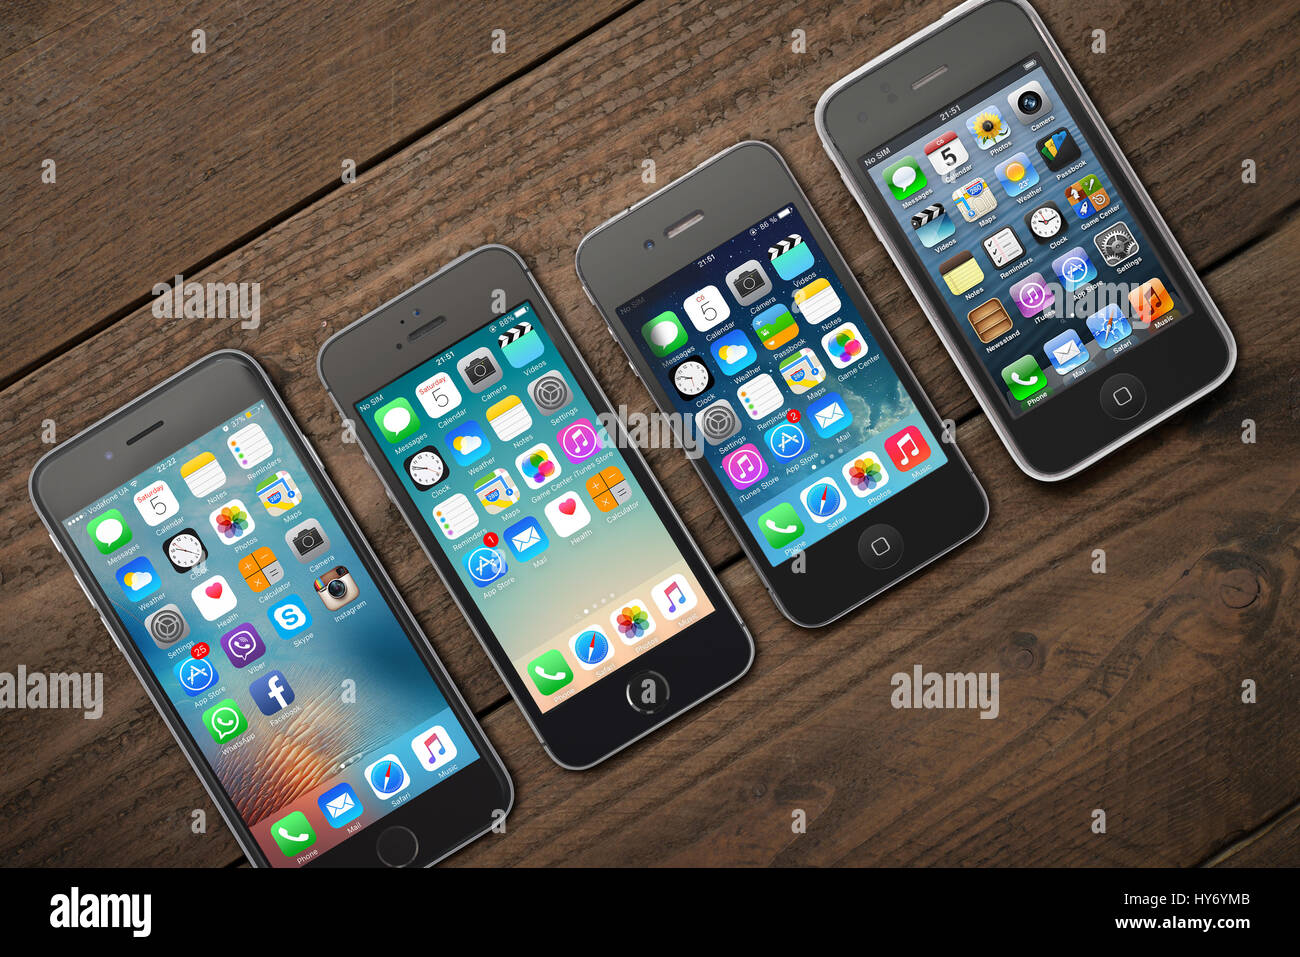 Kiev, Ukraine - March 05, 2016: Front view of a space grey color iPhones 6, 5s, 4 and 3gs generation showing the home screens on wooden background. Stock Photo